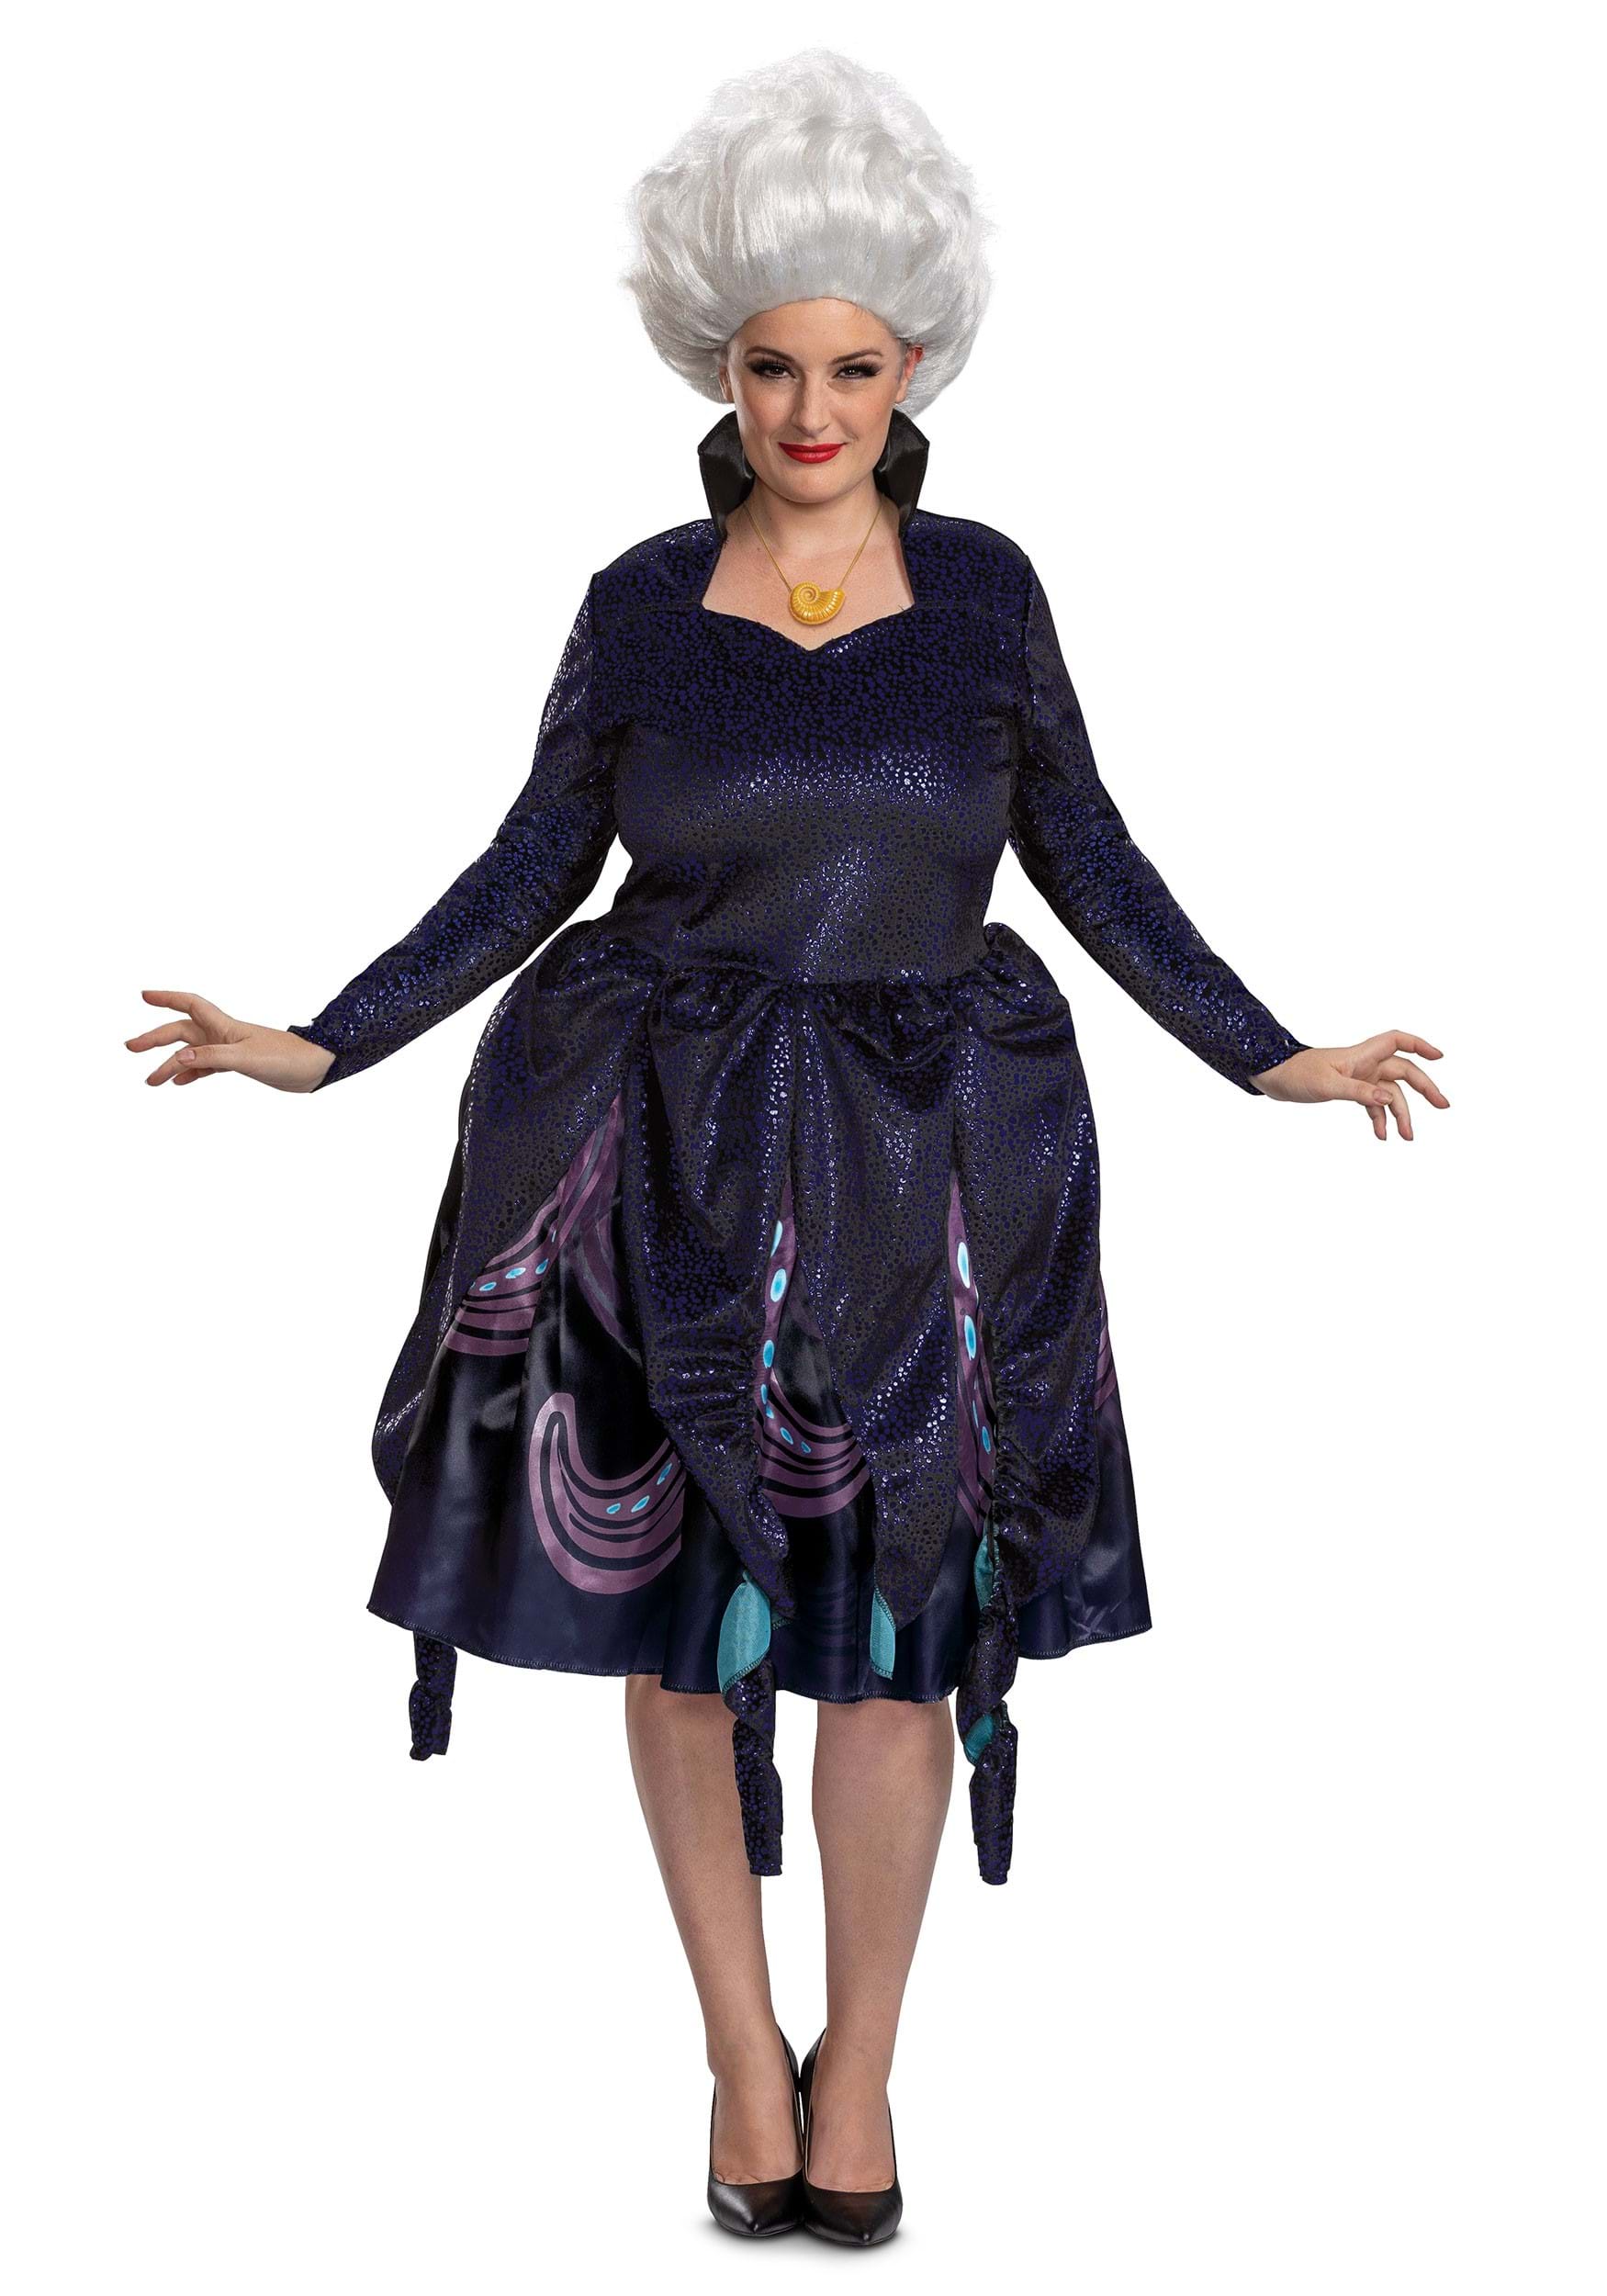 Image of Adult Little Mermaid Live Action Deluxe Ursula Costume ID DI125629-S